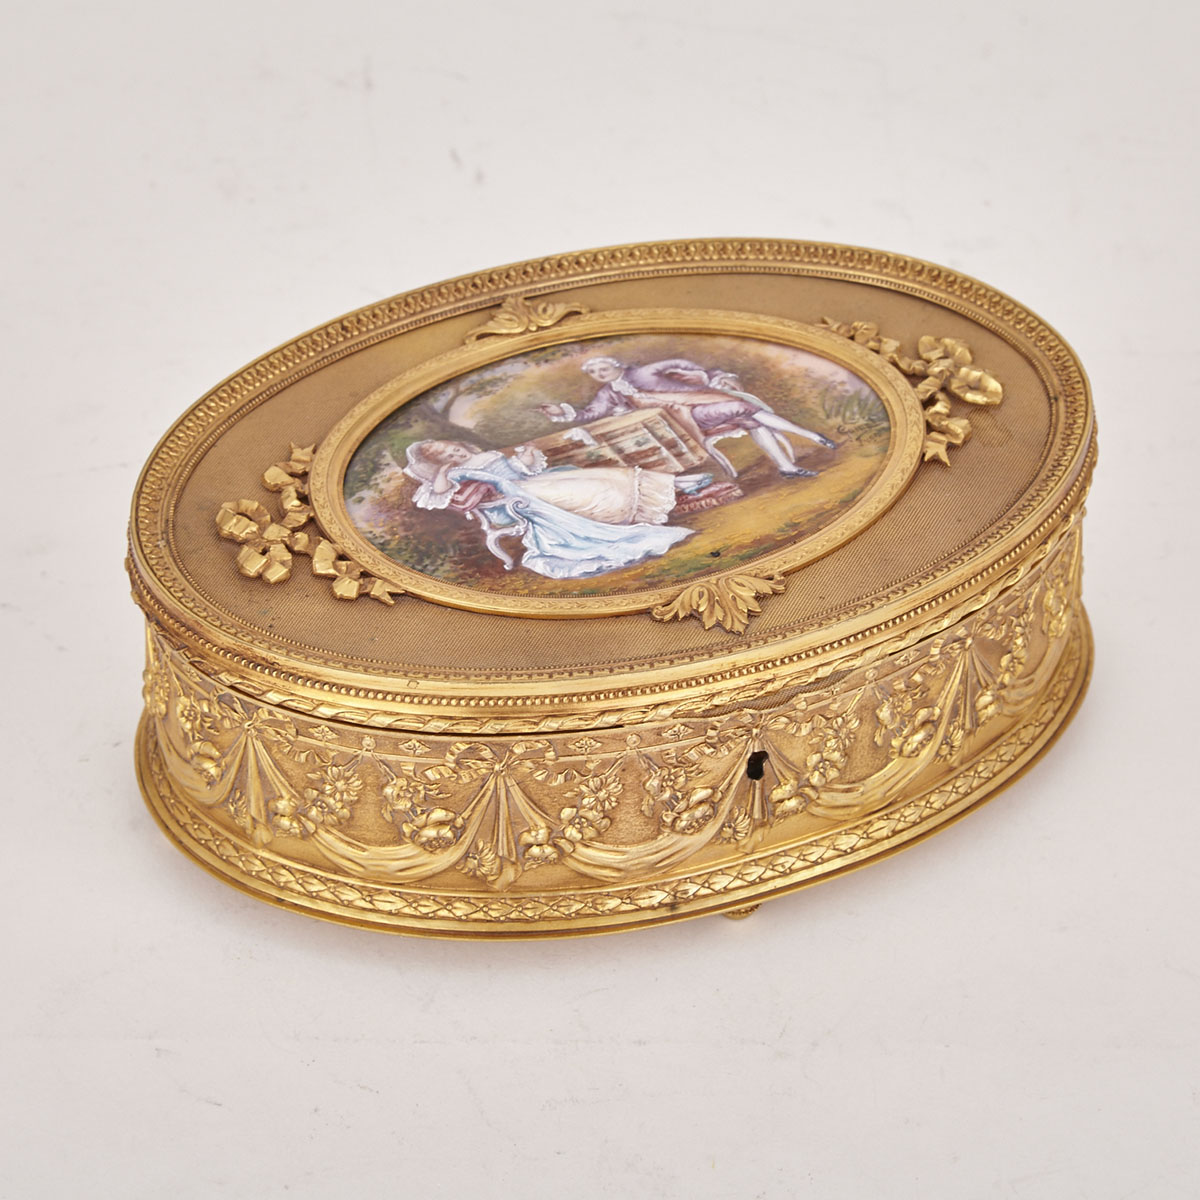 French Limoges Enamel Mounted  Oval Gilt Bronze Jewellery Casket, early 20th century